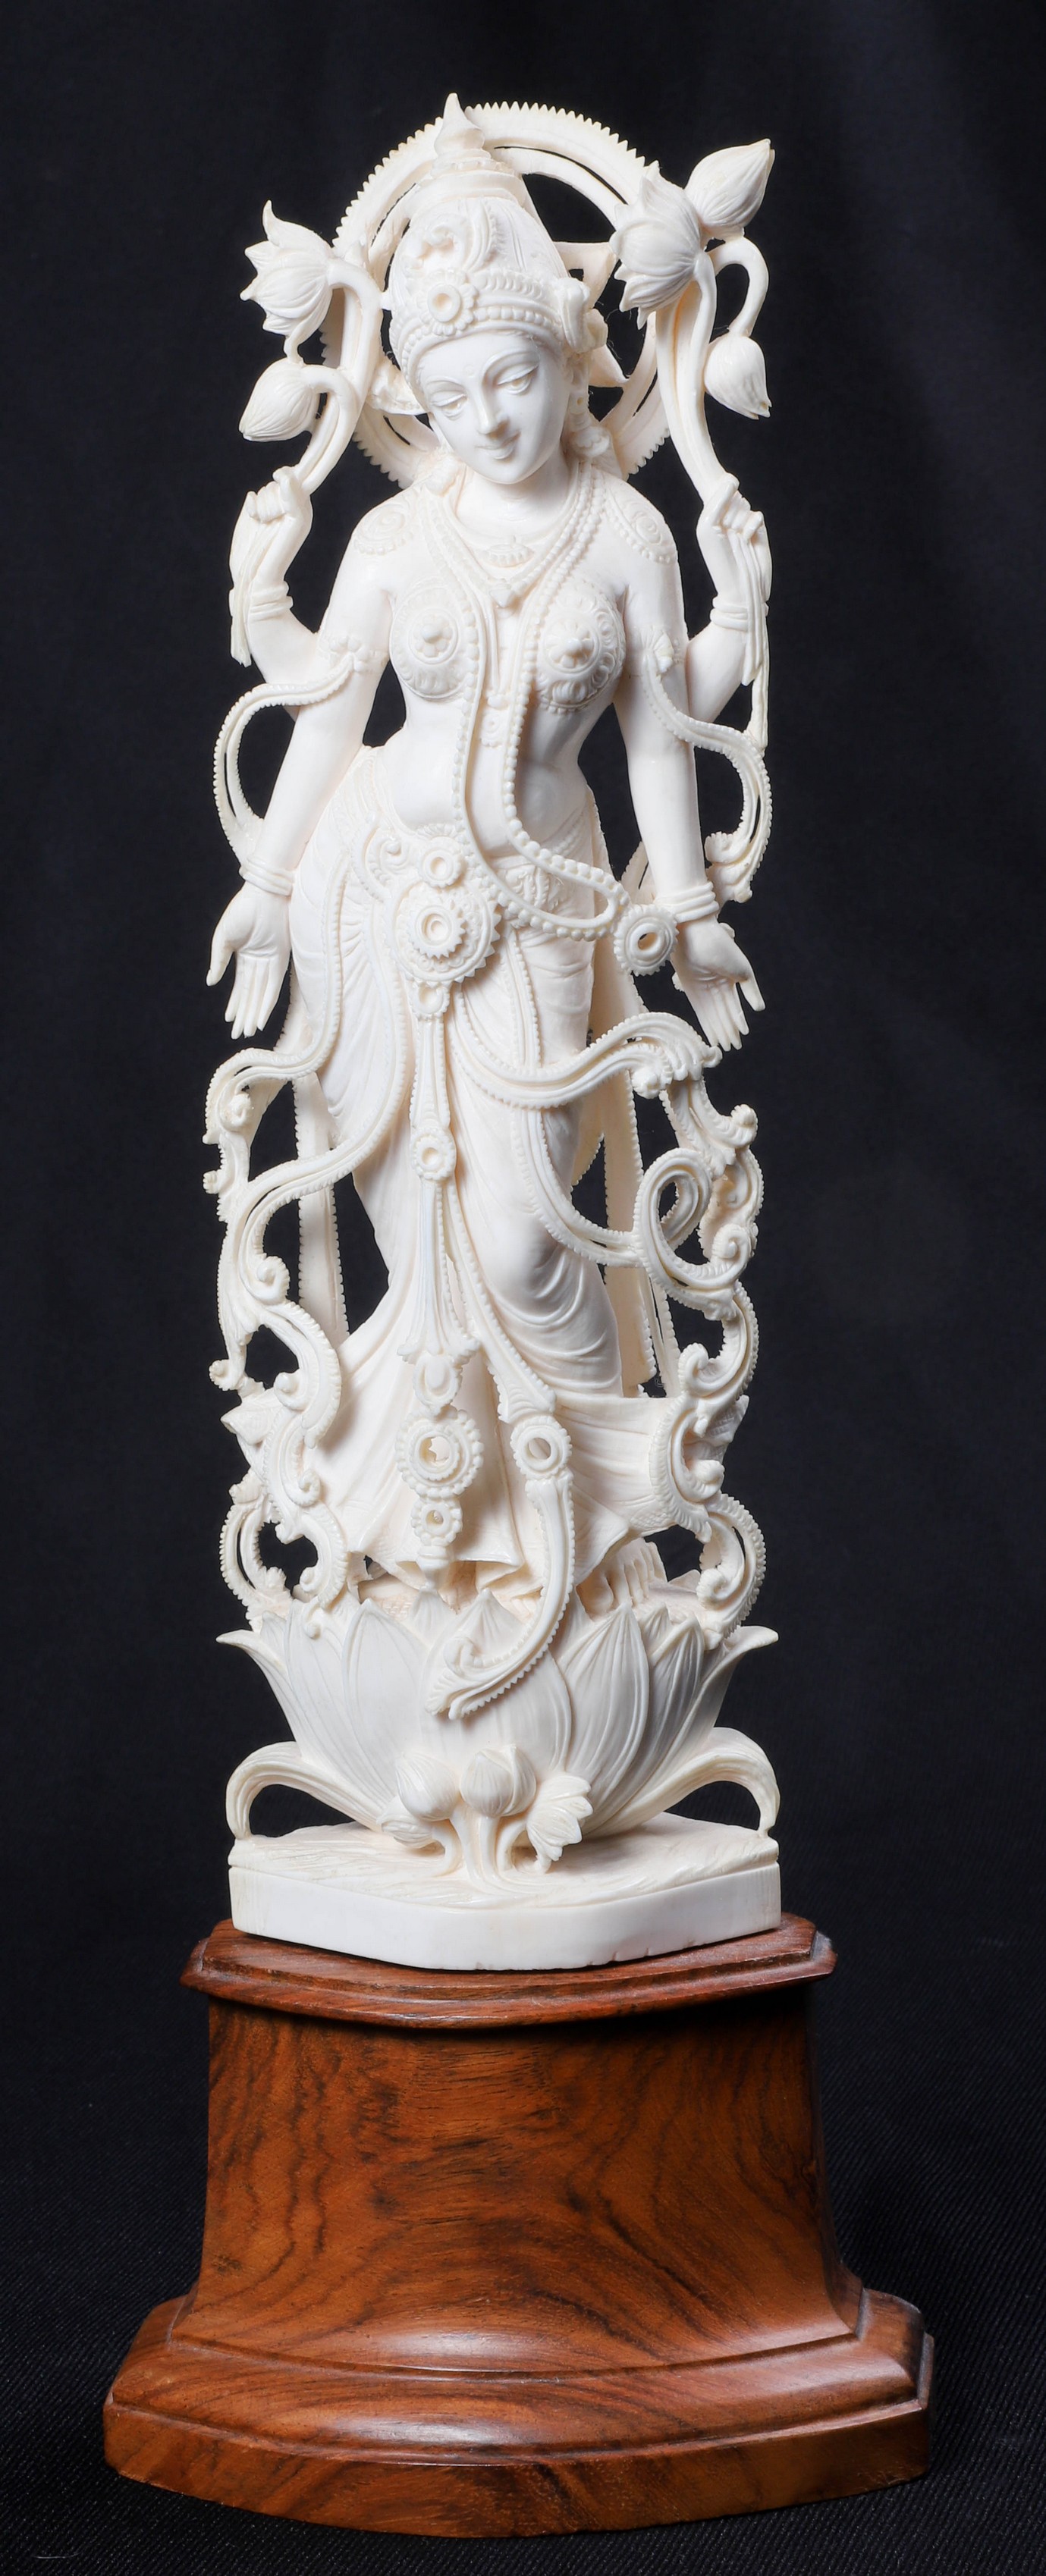 An Ivory Carving of Lord Venugopala  2e0d20